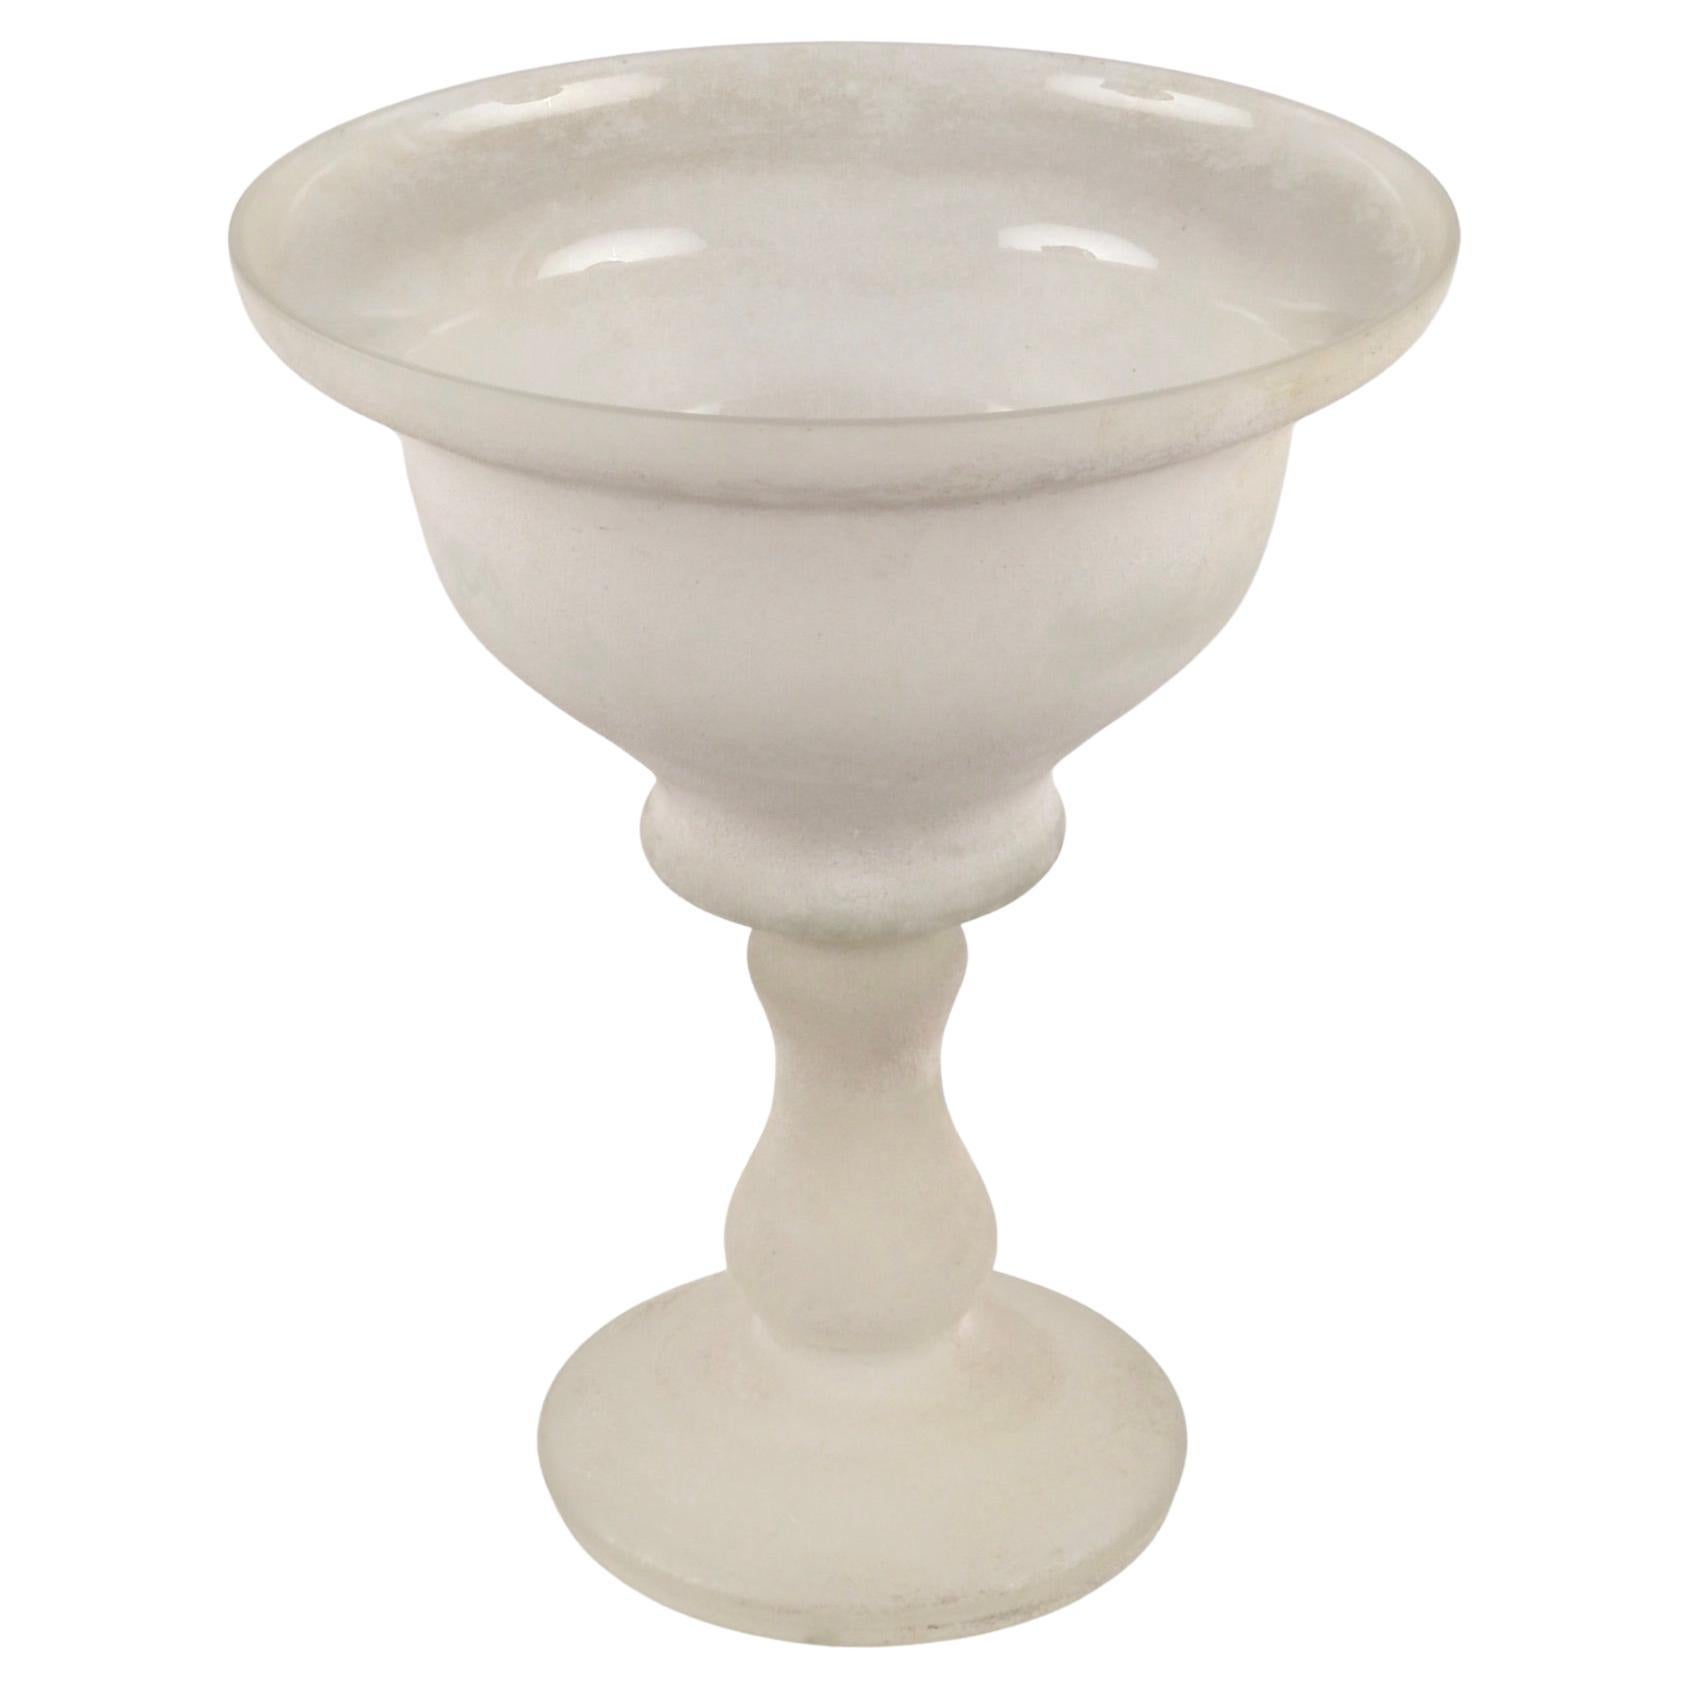 Murano Scavo Glass Footed Center Bowl, Italy, 1980s For Sale